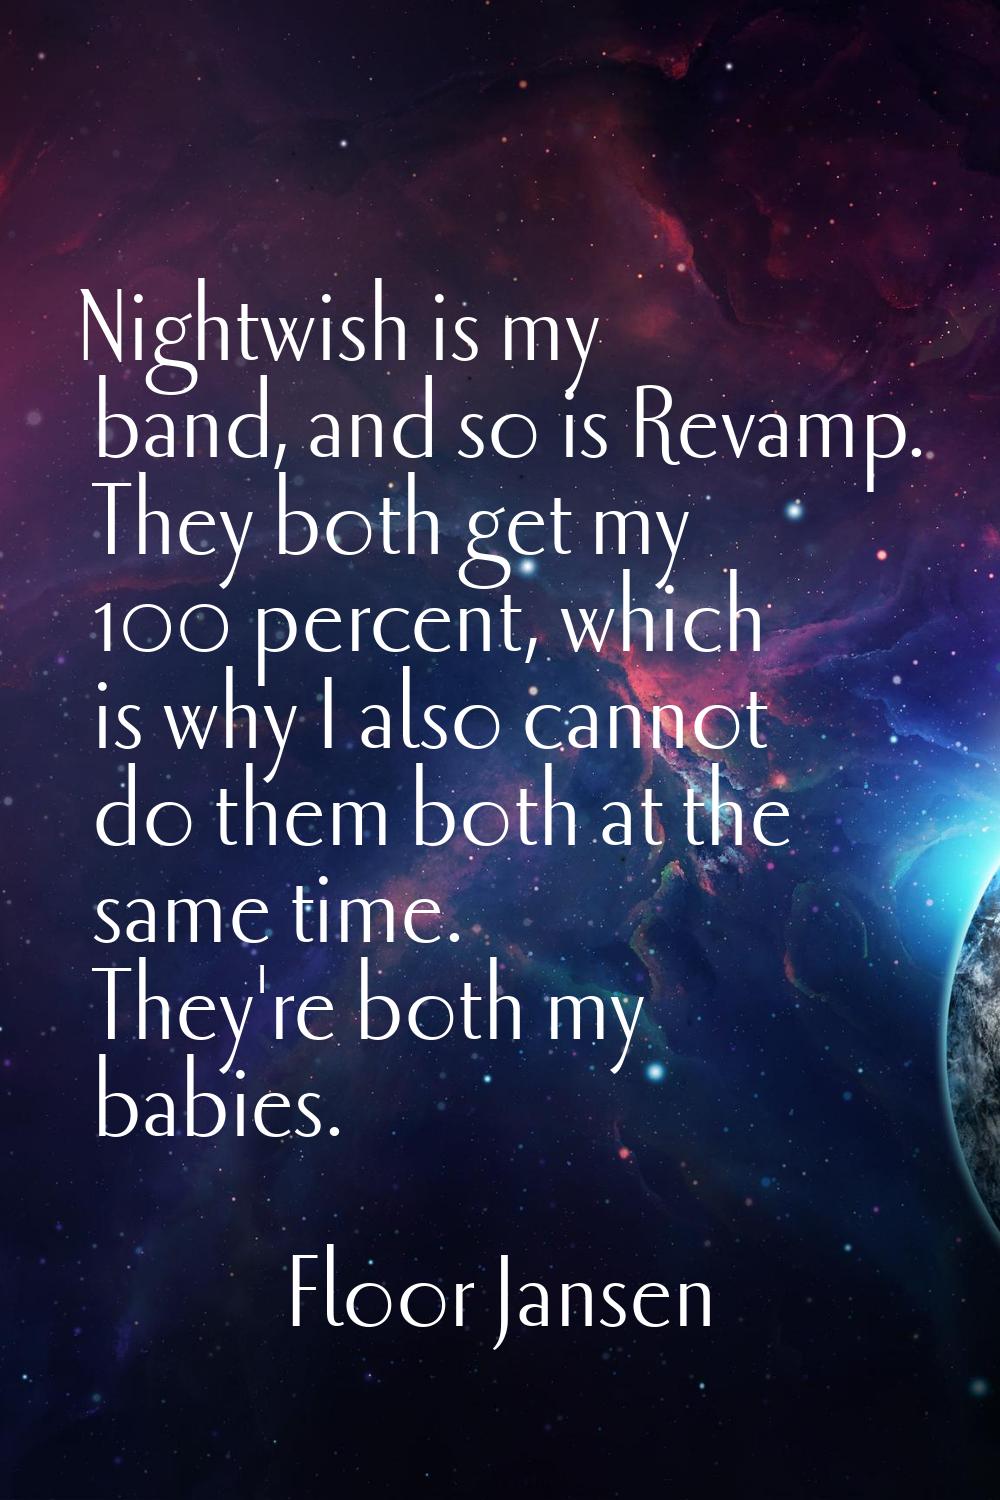 Nightwish is my band, and so is Revamp. They both get my 100 percent, which is why I also cannot do